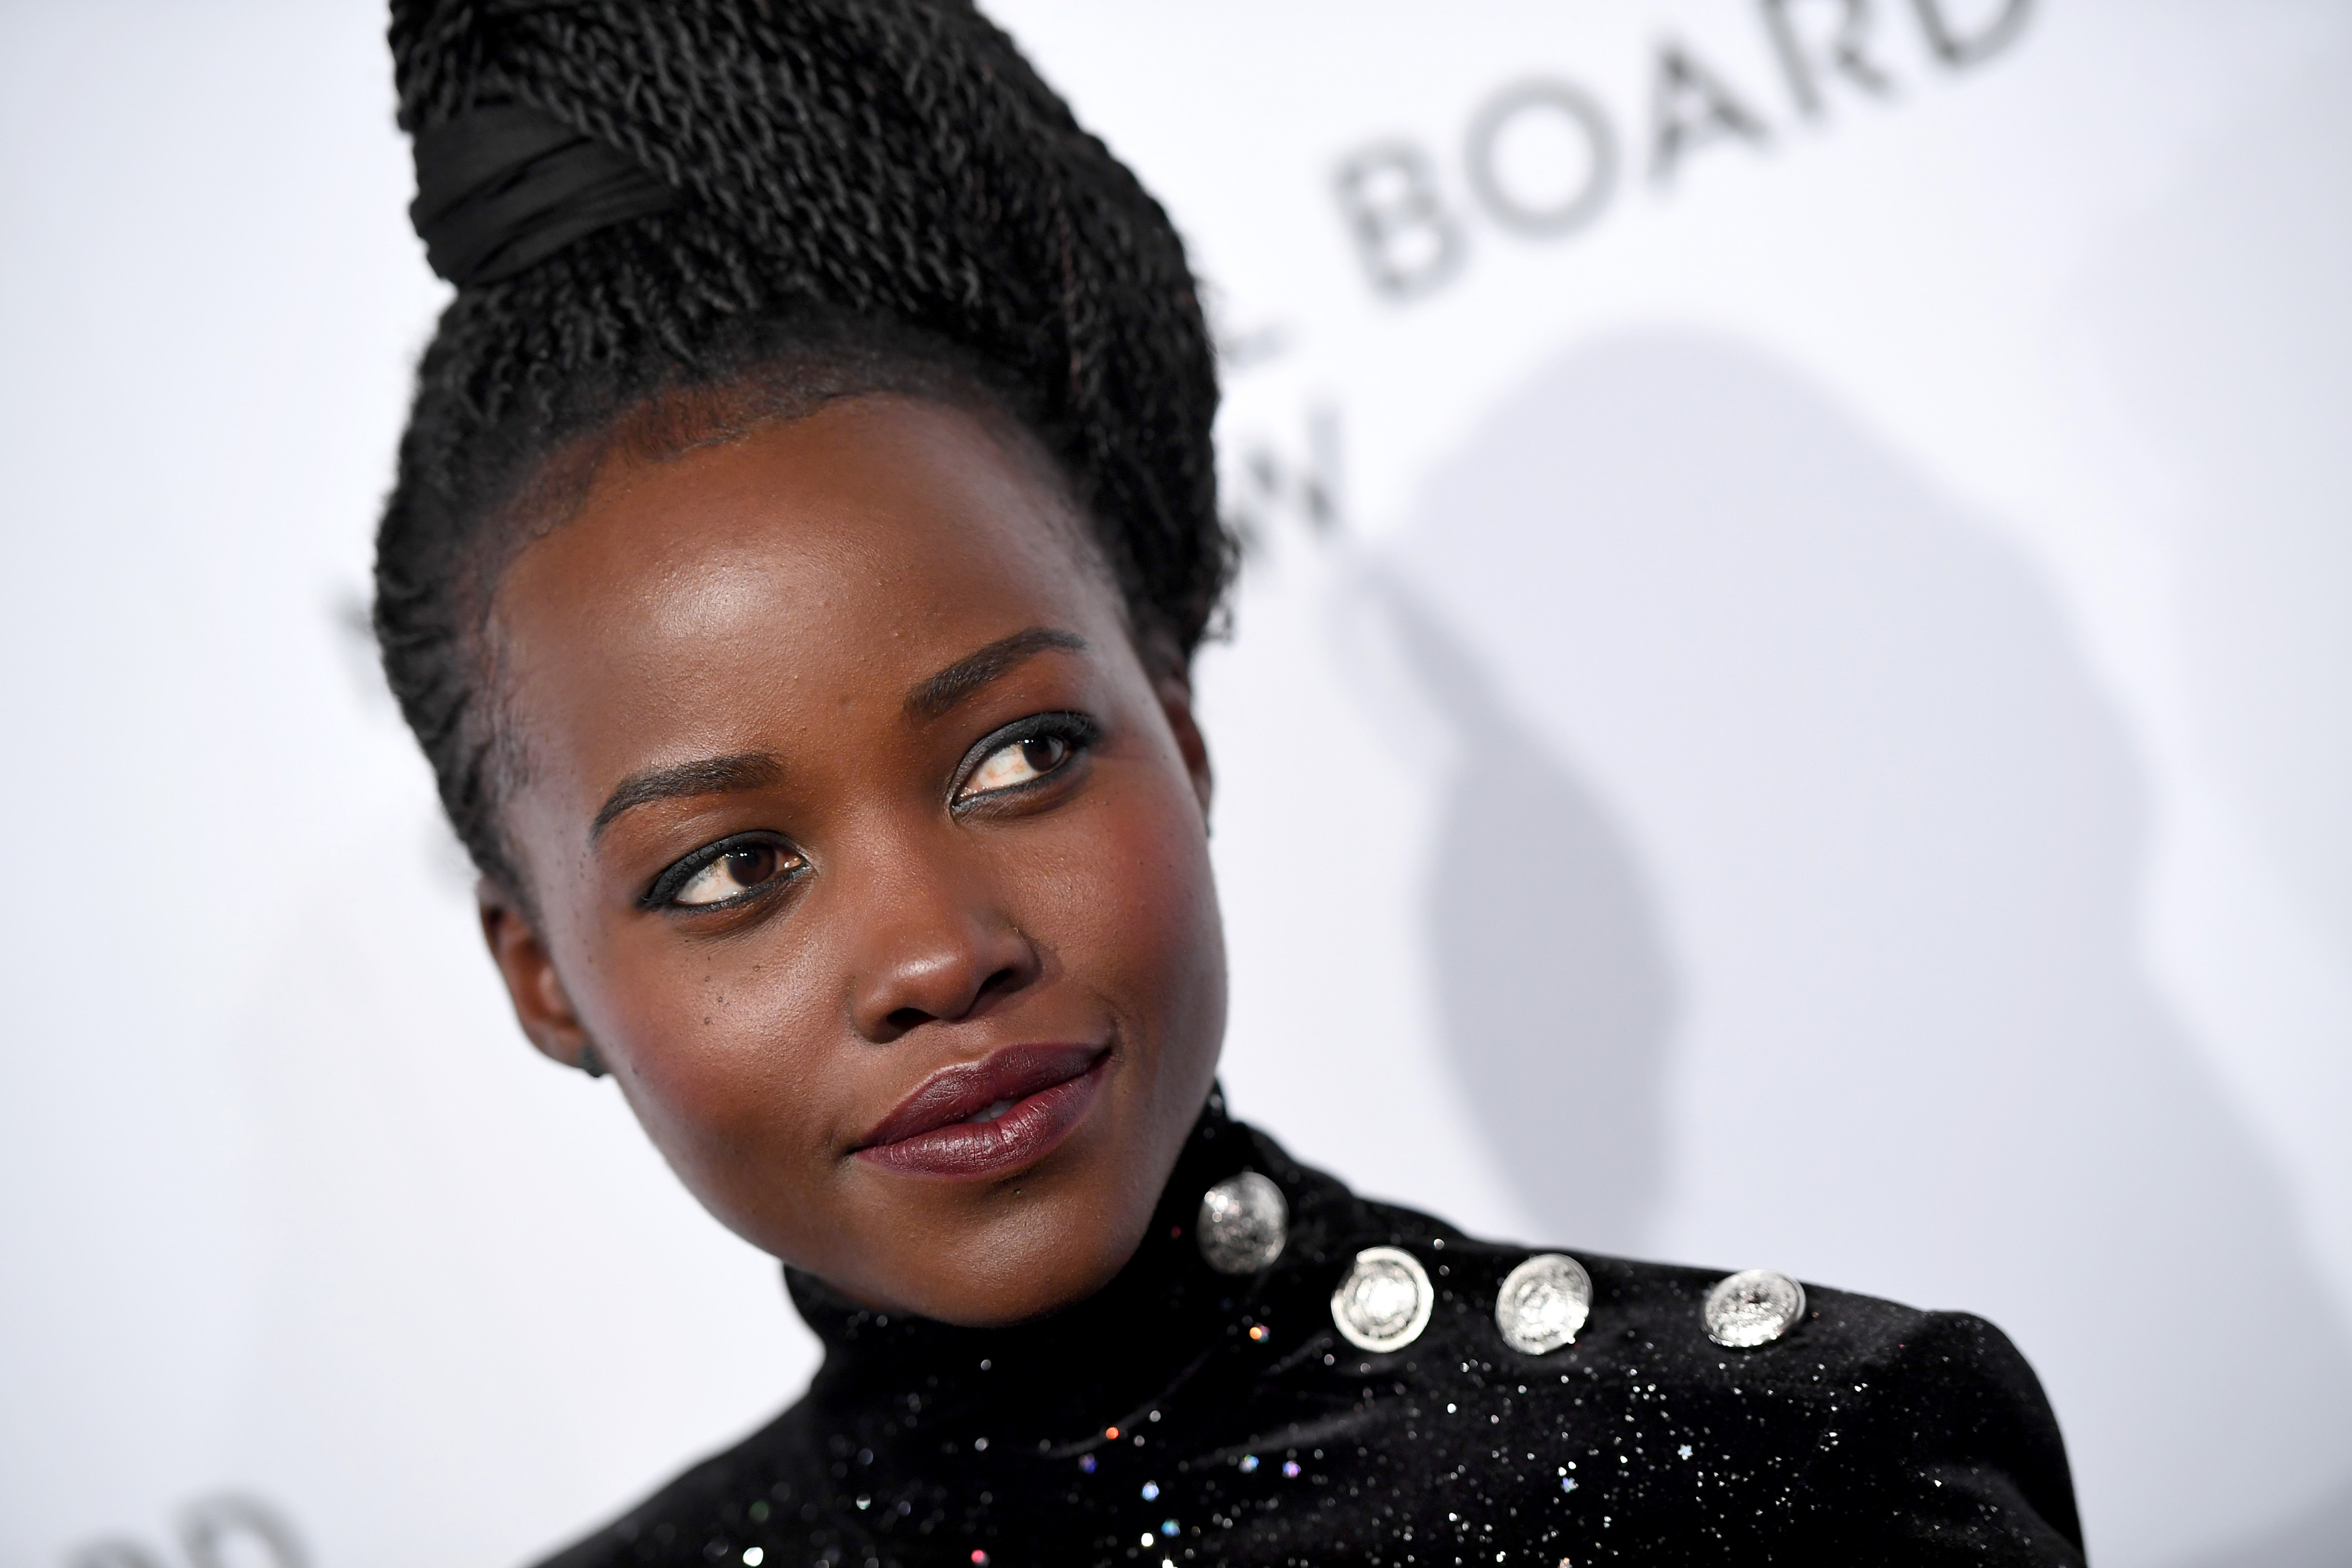 Actor Lupita Nyong'o attends The National Board Of Review Annual Awards Gala at Cipriani 42nd Street on January 9, 2018 in New York City. (Dimitrios Kambouris&mdash;Getty Images for National Board of Review)